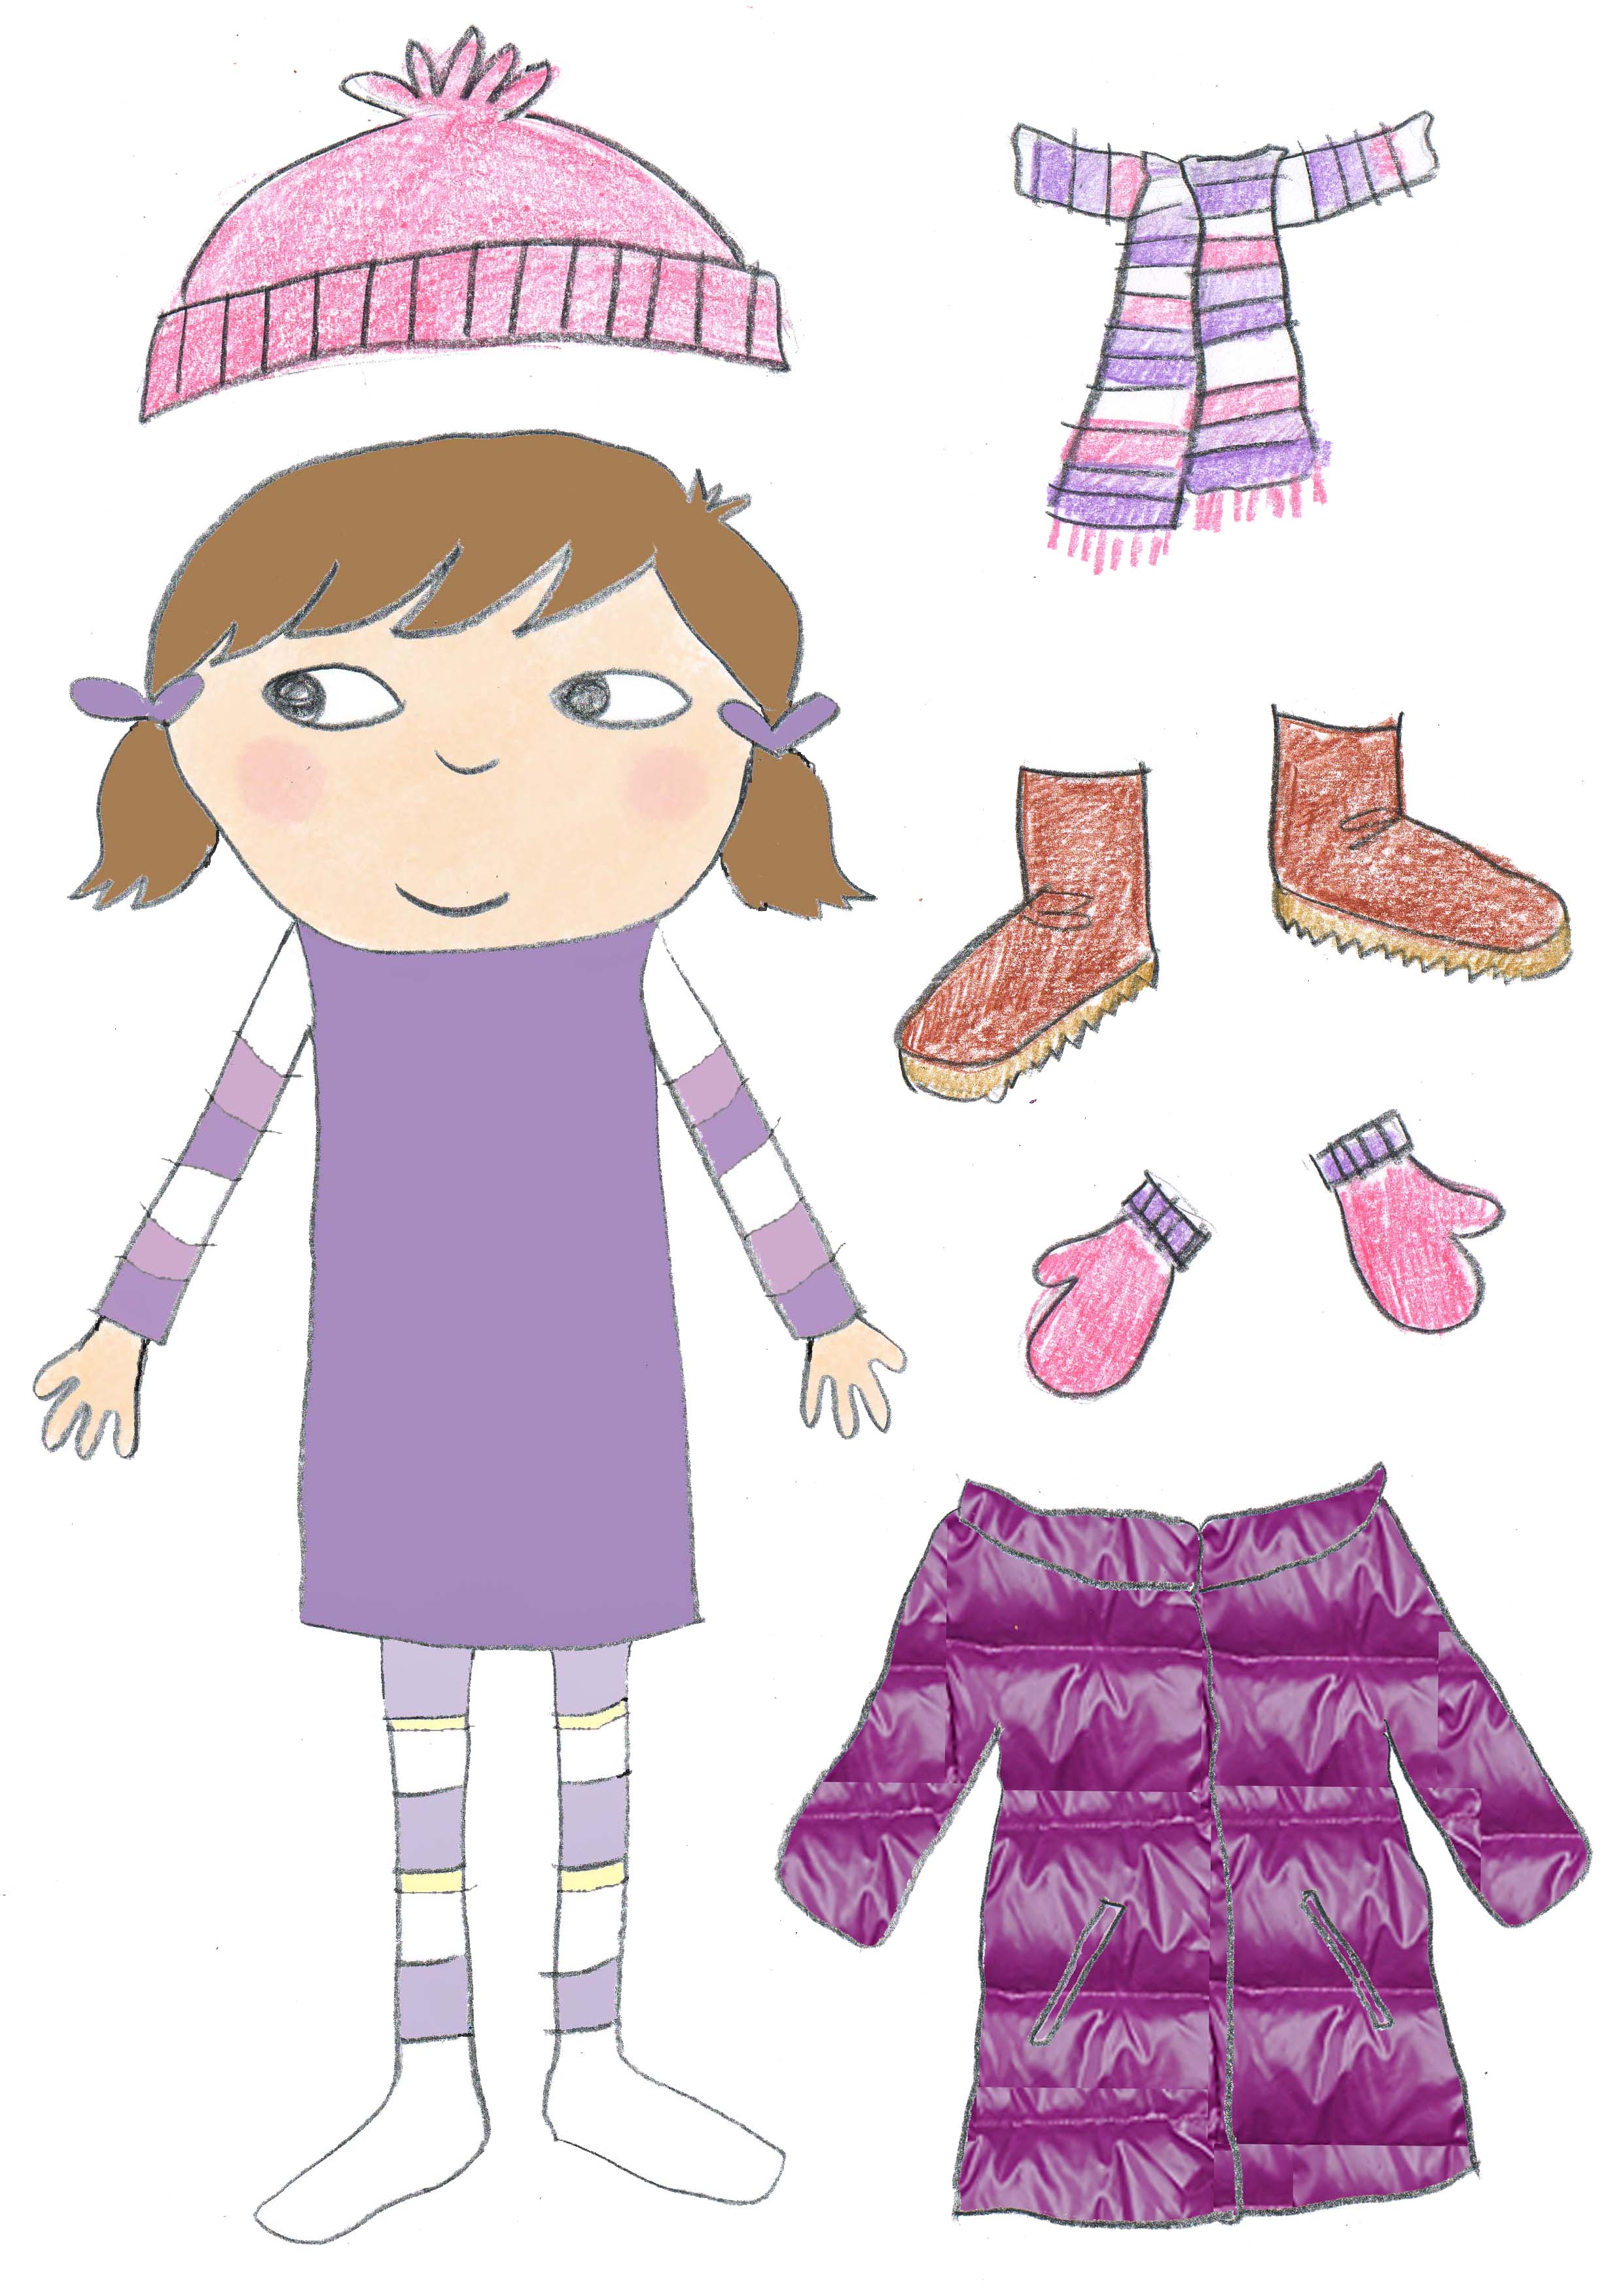 Printable Paper Doll Clothes